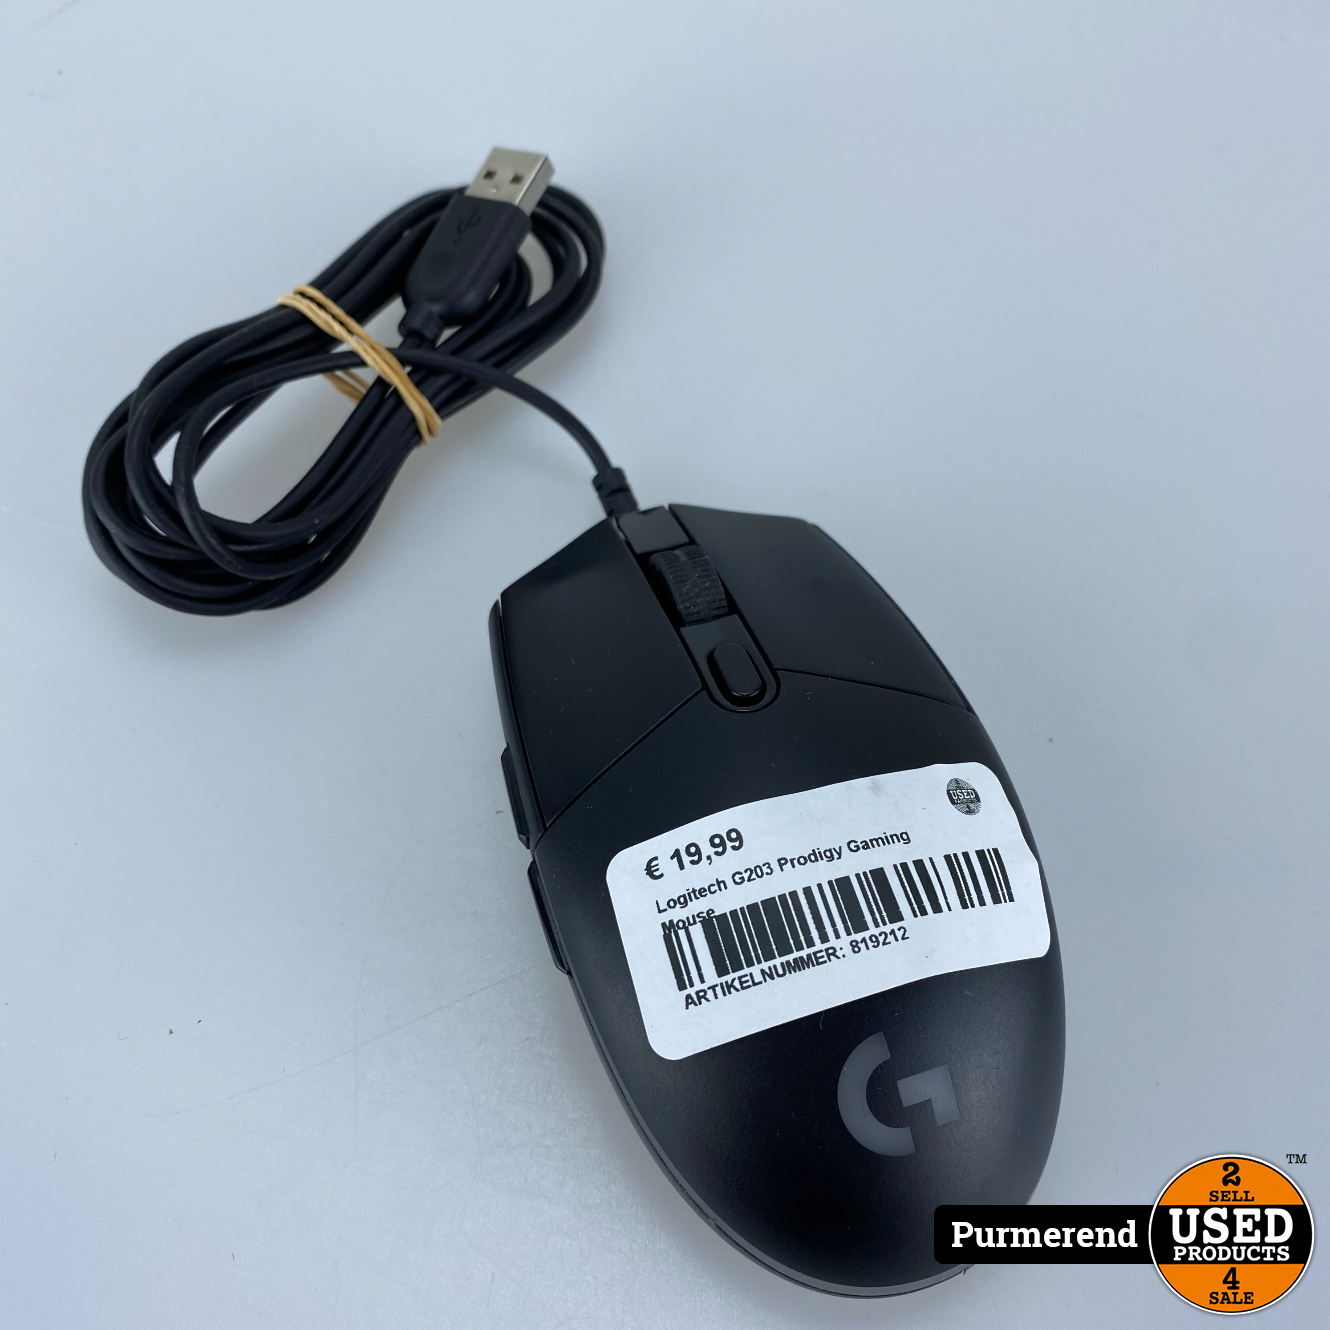 Logitech G203 Prodigy Gaming Mouse - Used Products Purmerend